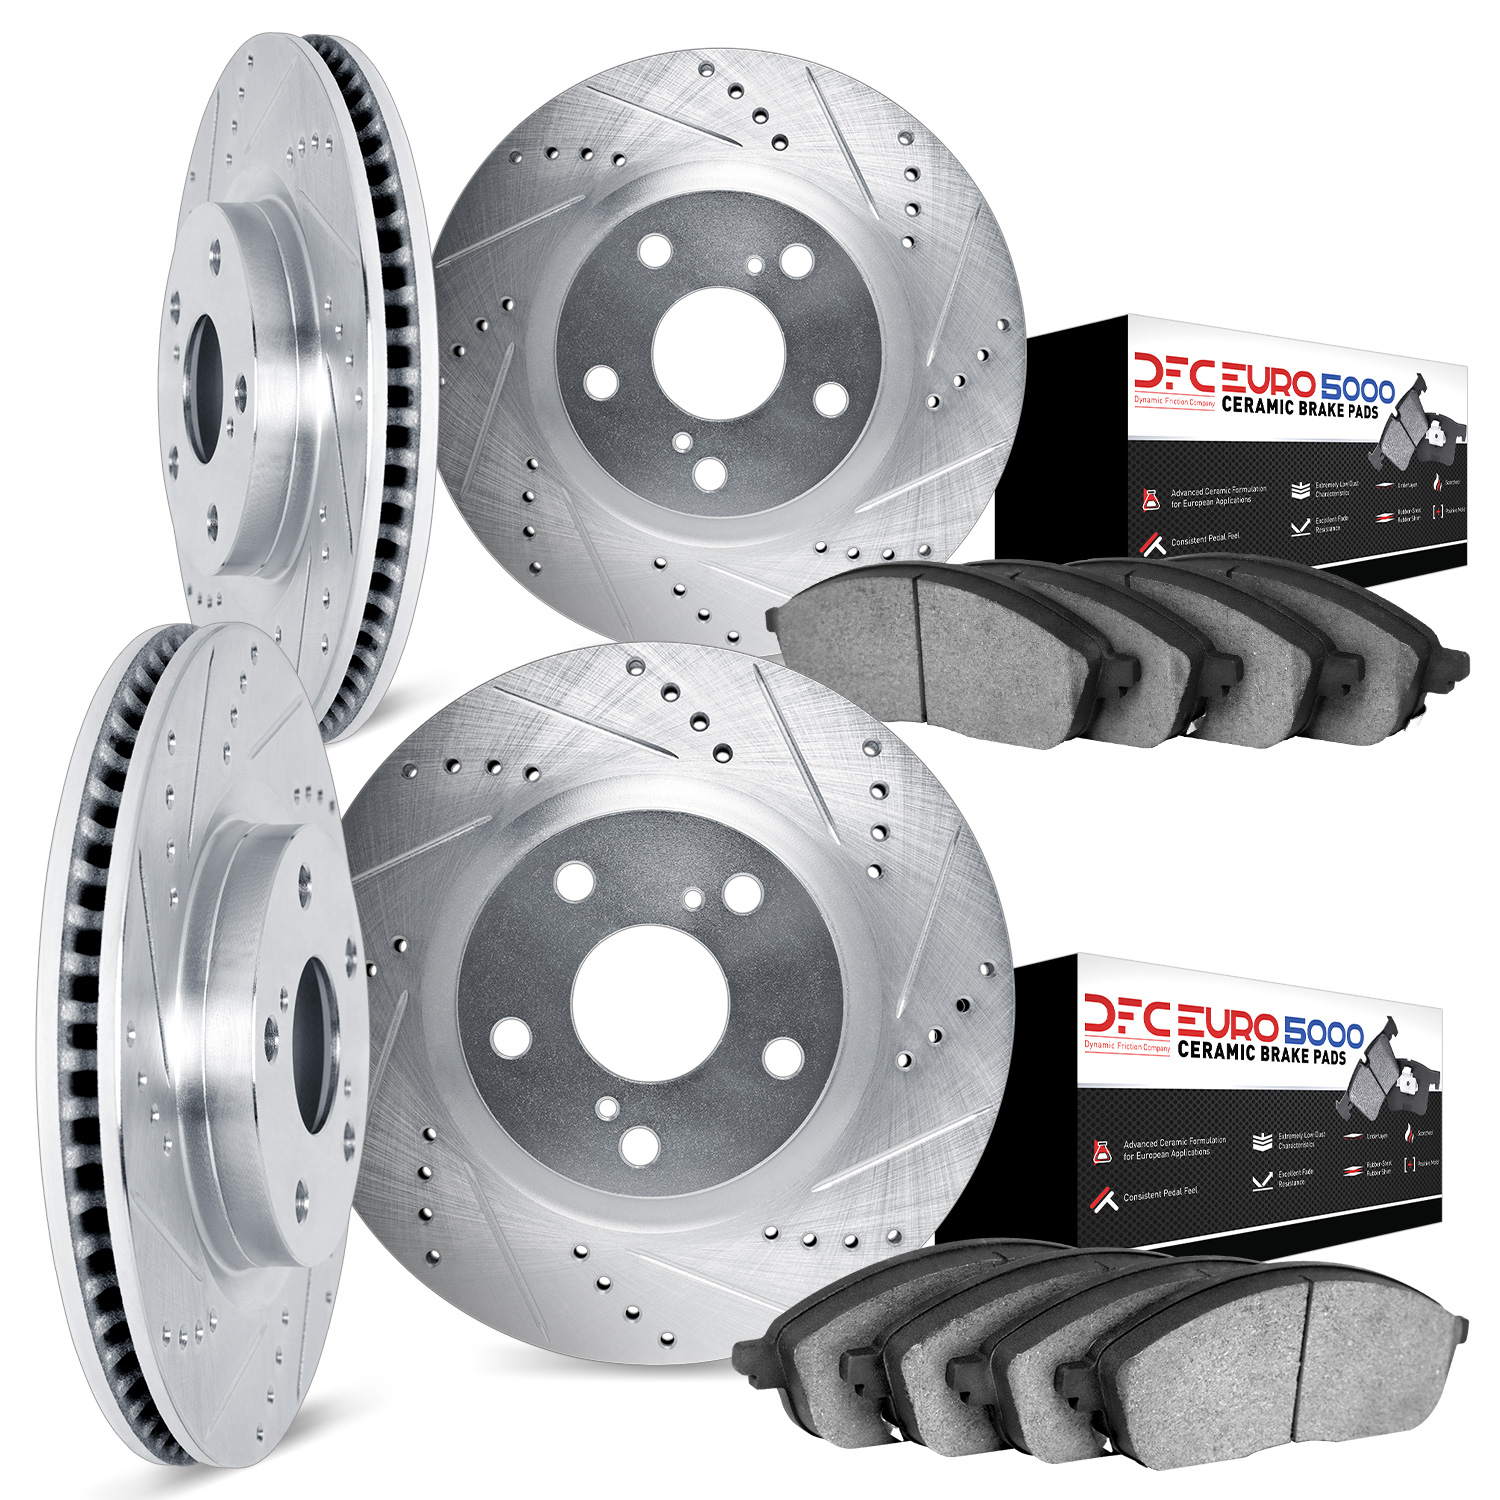 7604-11003 Drilled/Slotted Brake Rotors w/5000 Euro Ceramic Brake Pads Kit [Silver], 2005-2007 Land Rover, Position: Front and R